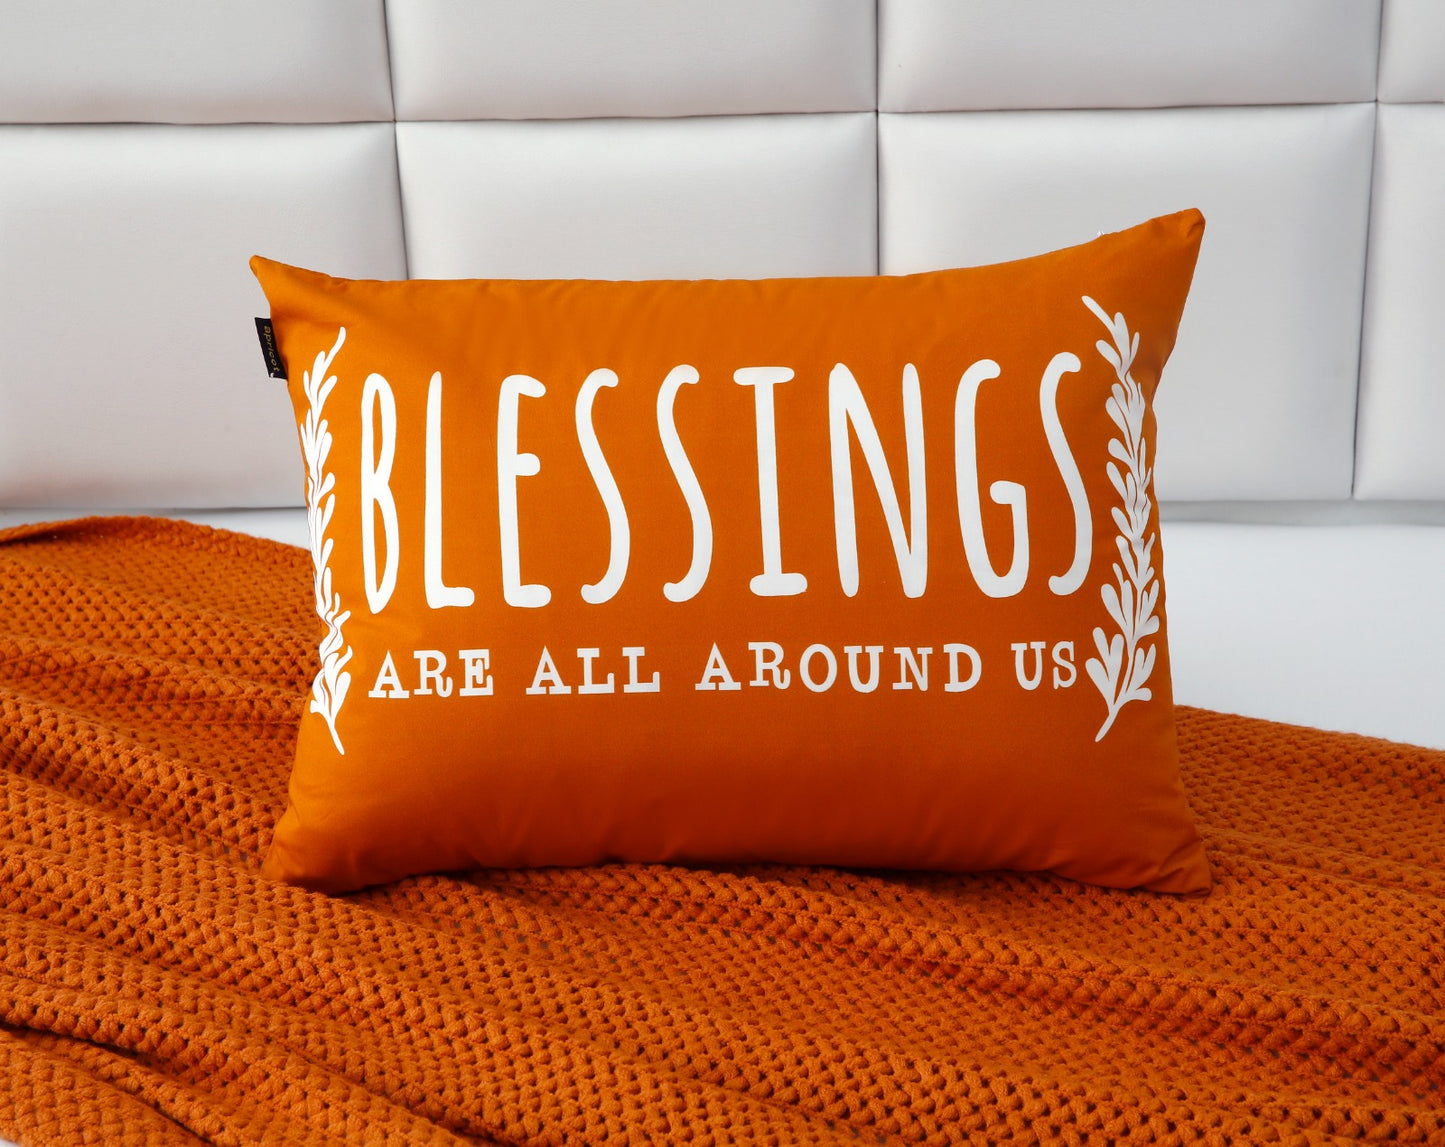 1 PCs Digital Printed Cotton Bed Pillow-Blessings